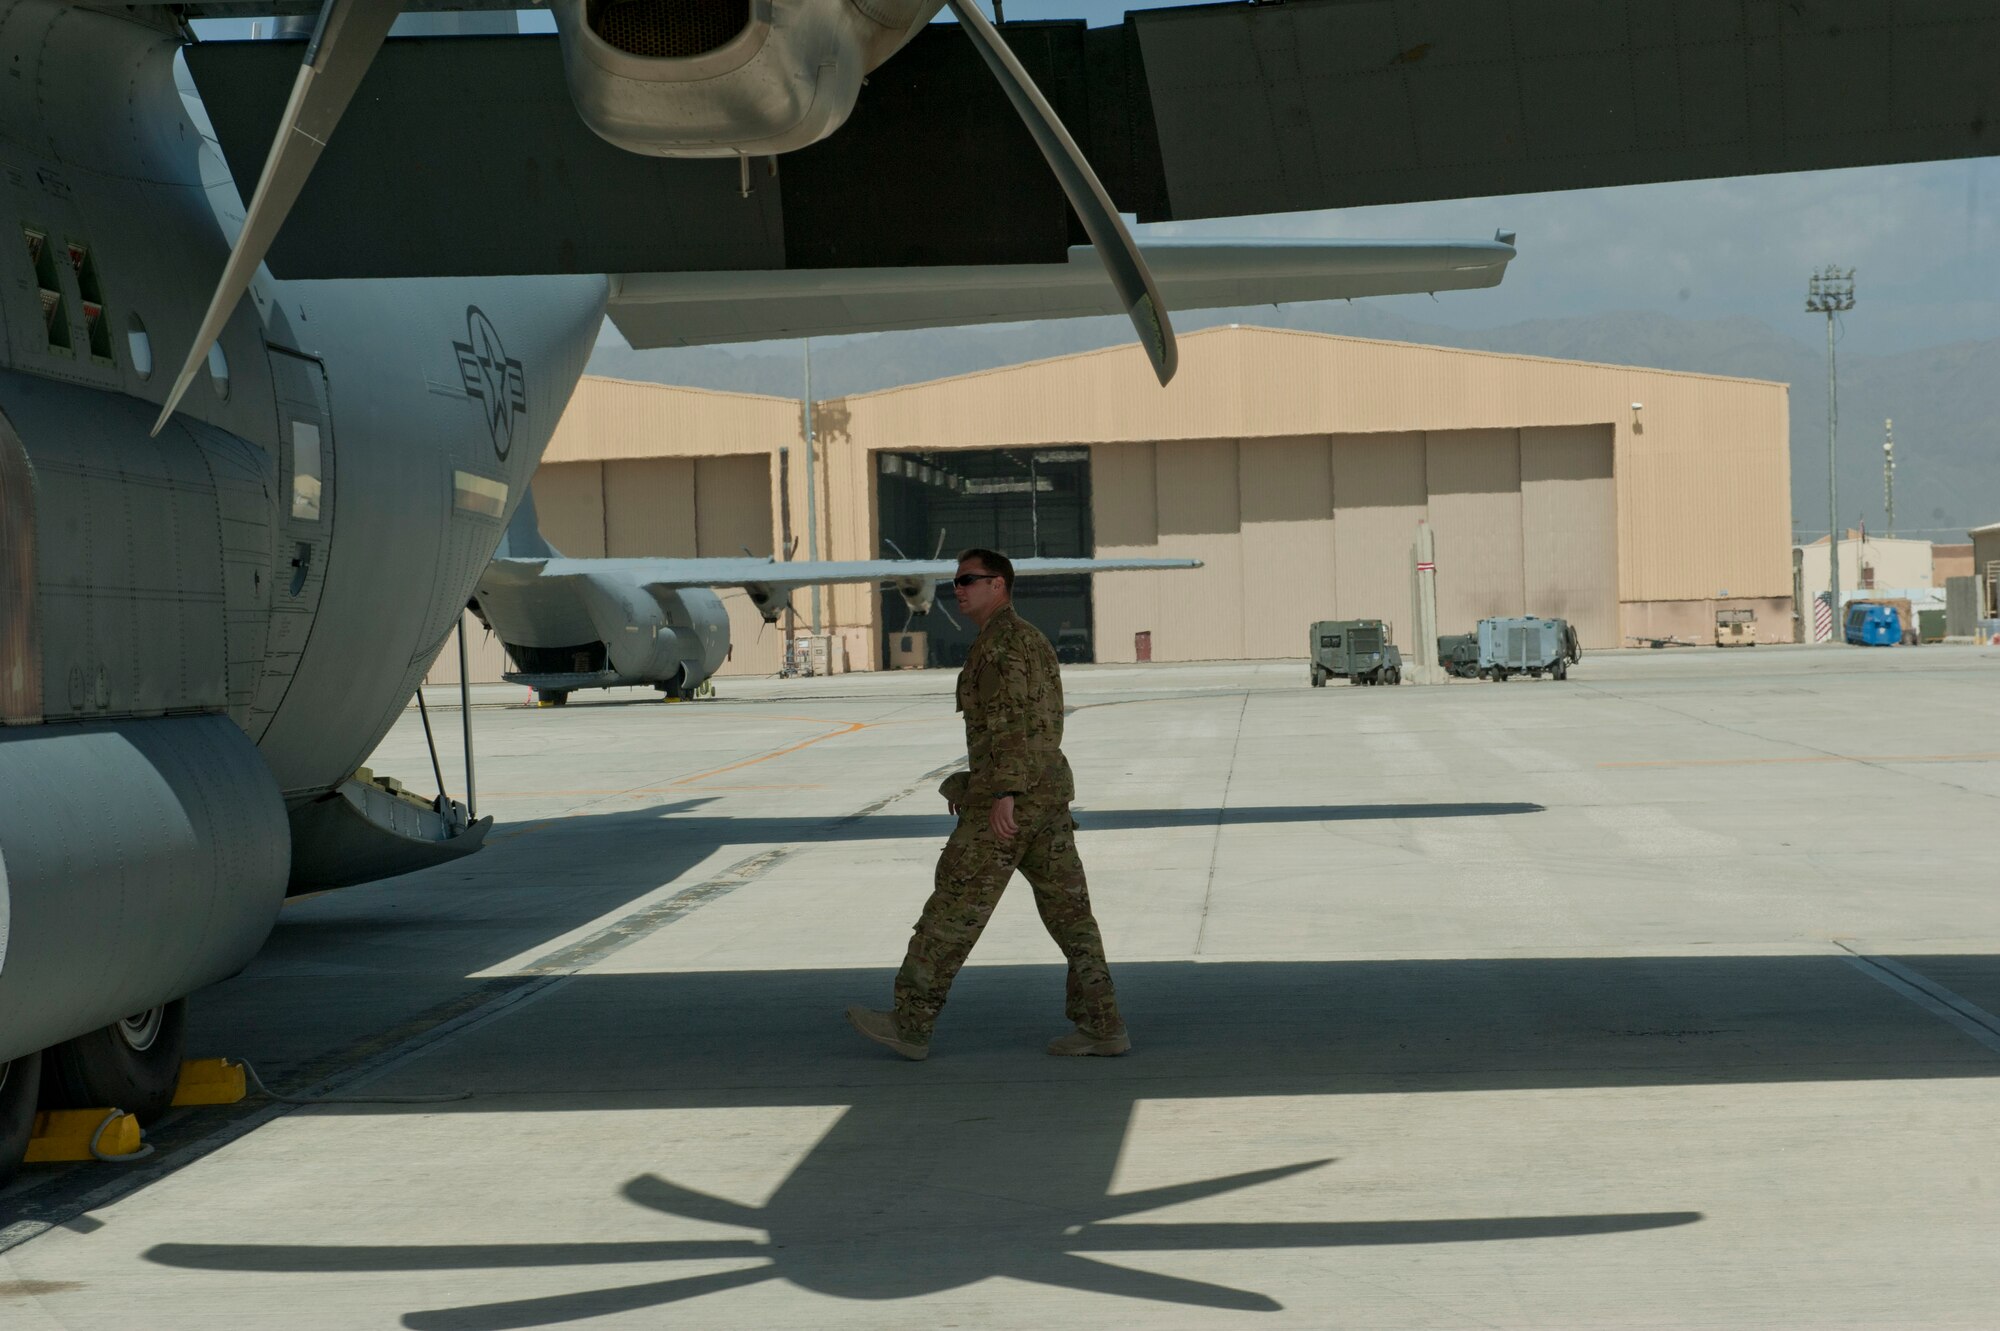 Capt. Andrew Campbell, 774th Expeditionary Airlift Squadron C-130J Super Hercules pilot, conducts a pre-flight inspection of the aircraft, Bagram Airfield, Afghanistan, Aug. 19, 2016. Campbell along with other Airmen from the 774th EAS were preparing to deliver cargo and fuel to Camp Dwyer, Afghanistan. (U.S. Air Force photo by Capt. Korey Fratini)